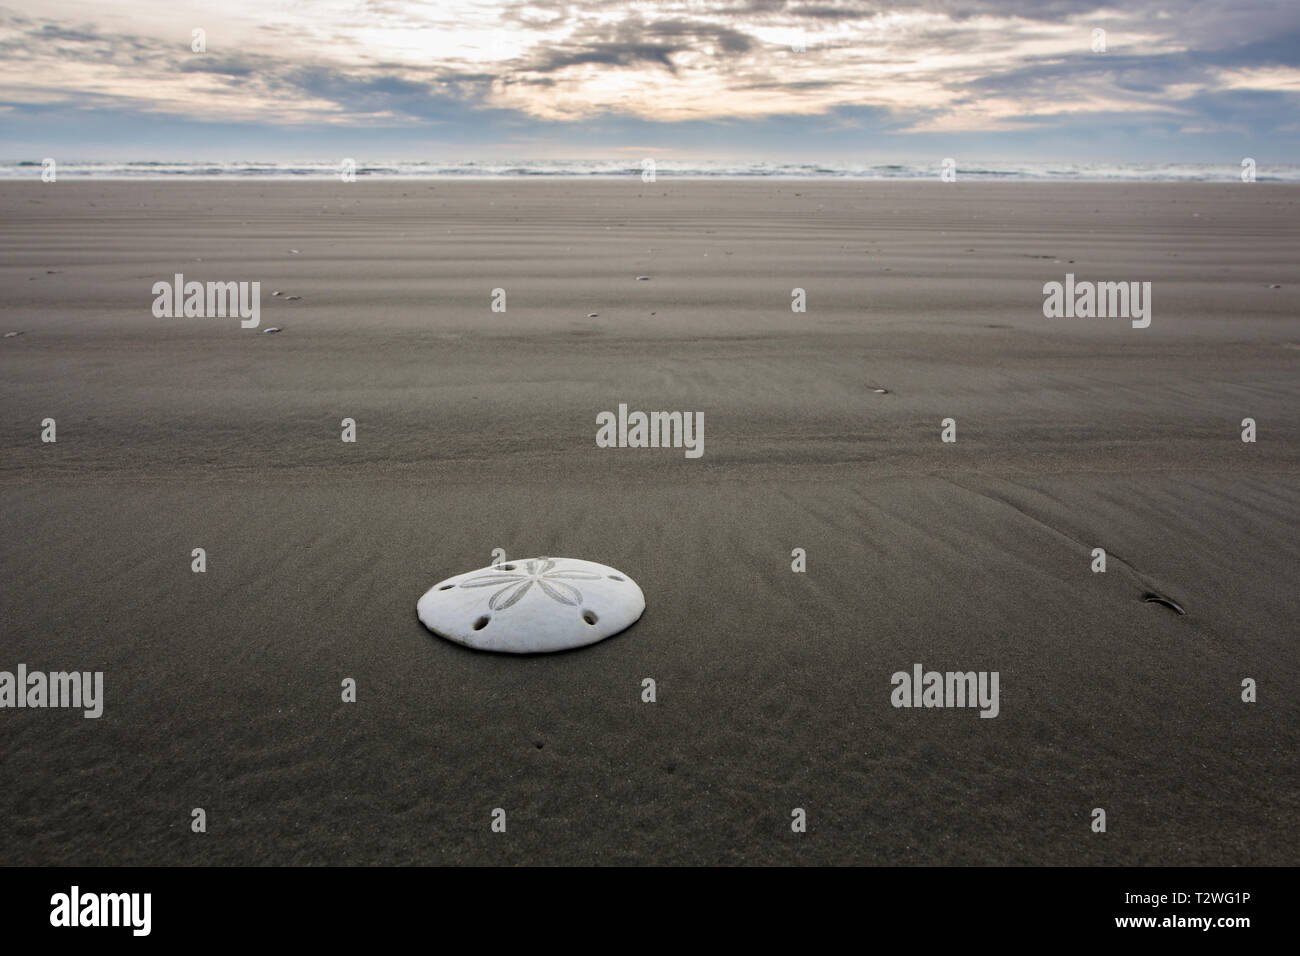 A sand dollar lays alone on a untouched pristine beach with the ocean in the distance. Stock Photo